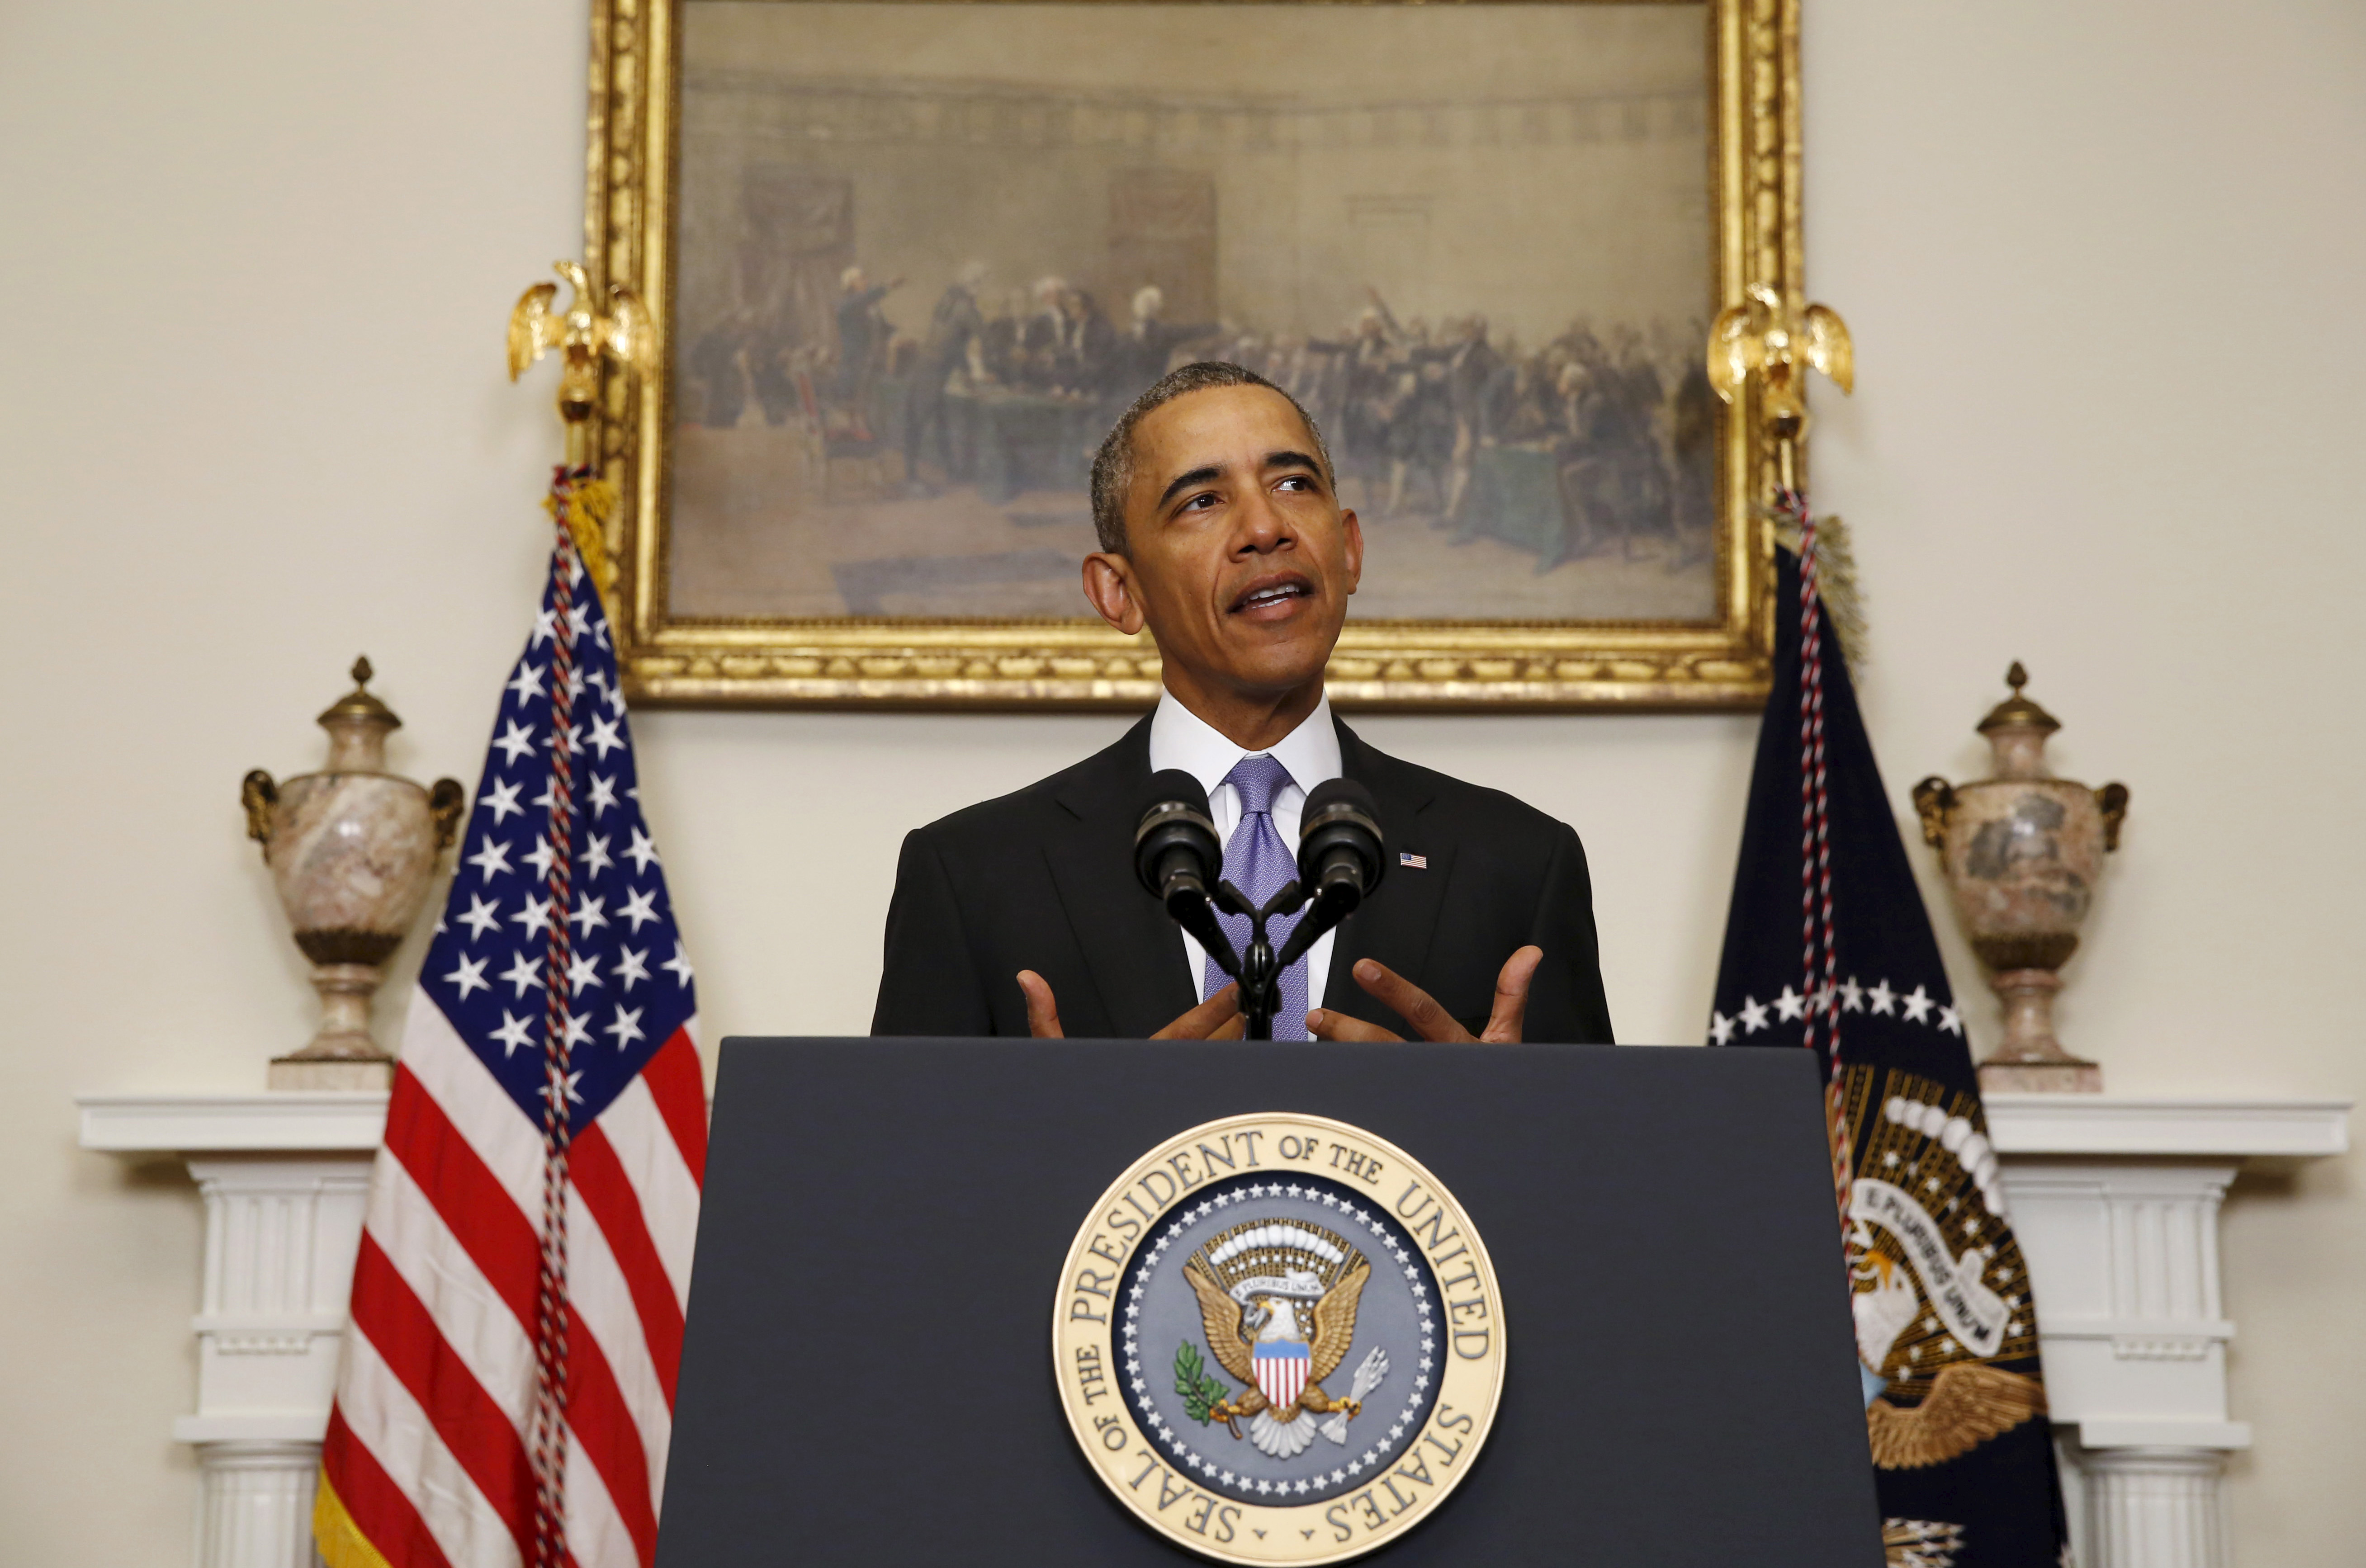 Forgænger fuzzy embargo Obama Must Institutionalize Iran Nuclear Deal Diplomacy - Atlantic Council